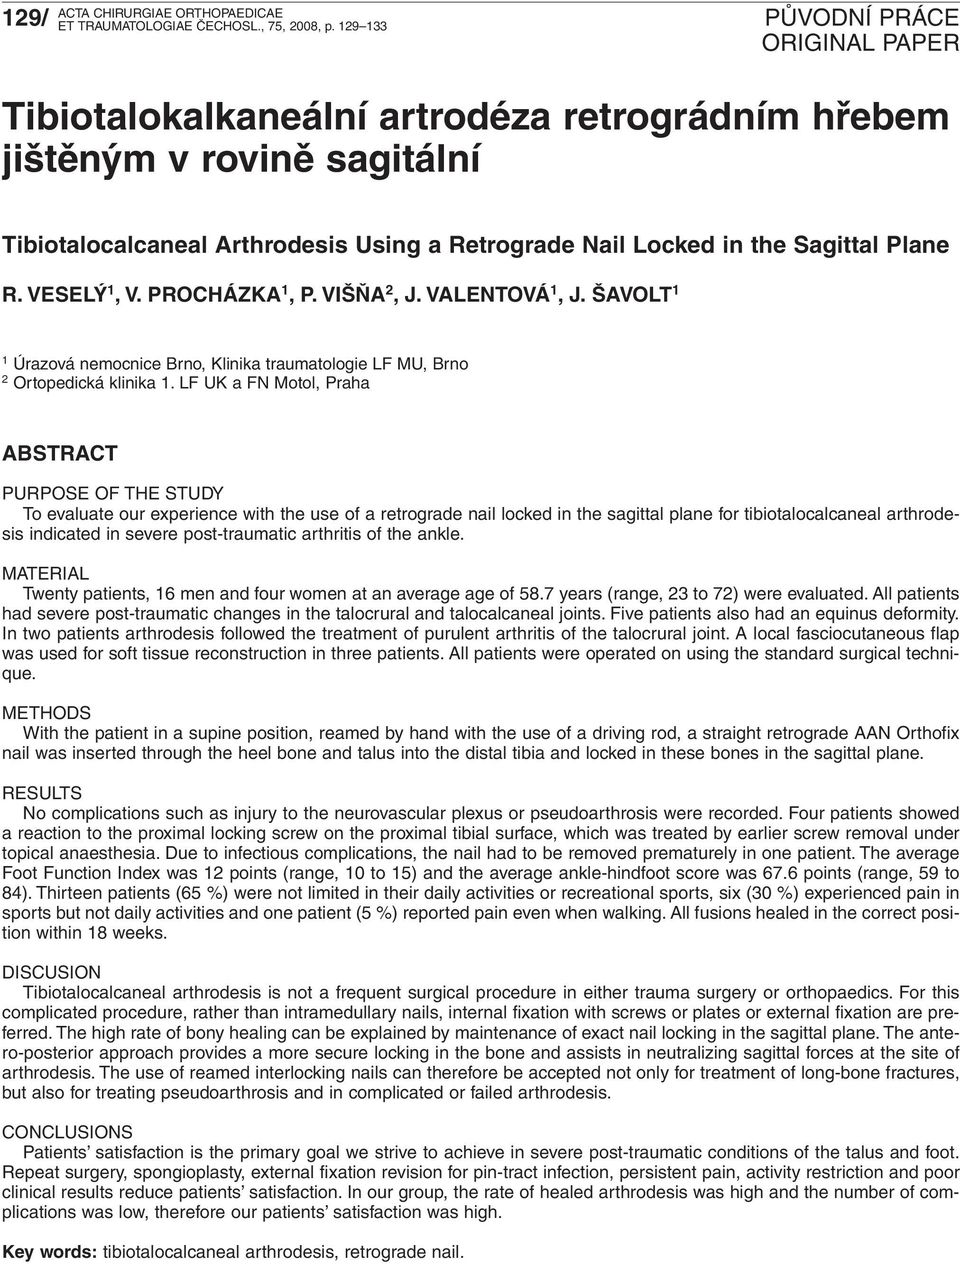 LF UK a FN Motol, Praha ABSTRACT PURPOSE OF THE STUDY To evaluate our experience with the use of a retrograde nail locked in the sagittal plane for tibiotalocalcaneal arthrodesis indicated in severe